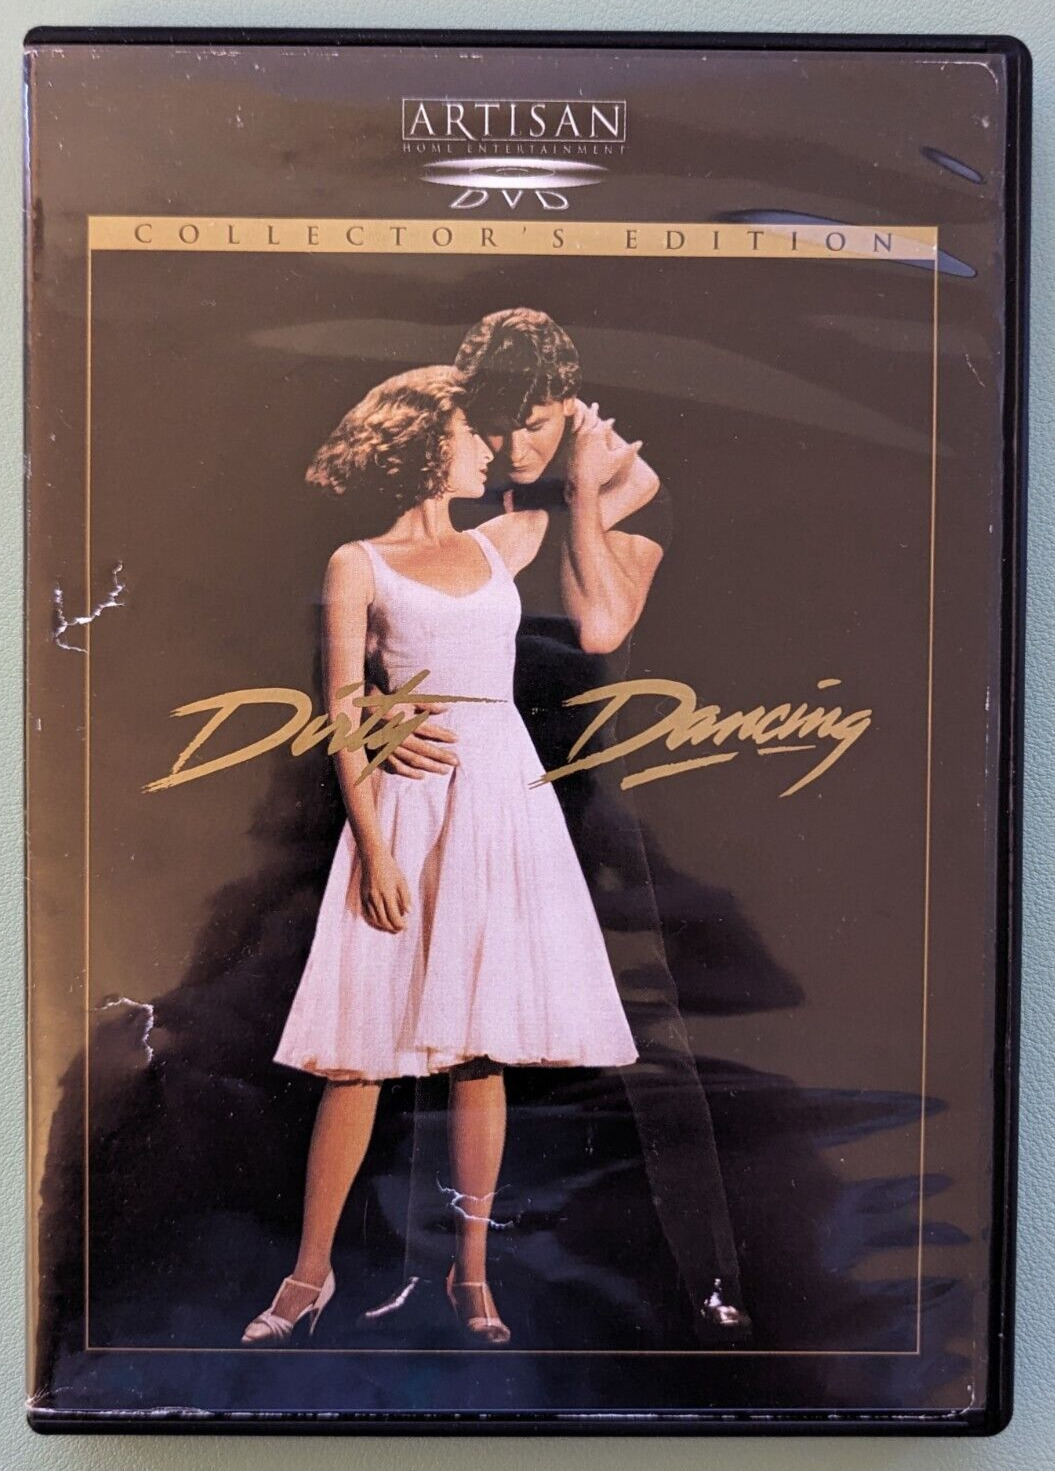 Dirty Dancing (DVD, 1999, Collector's Edition)